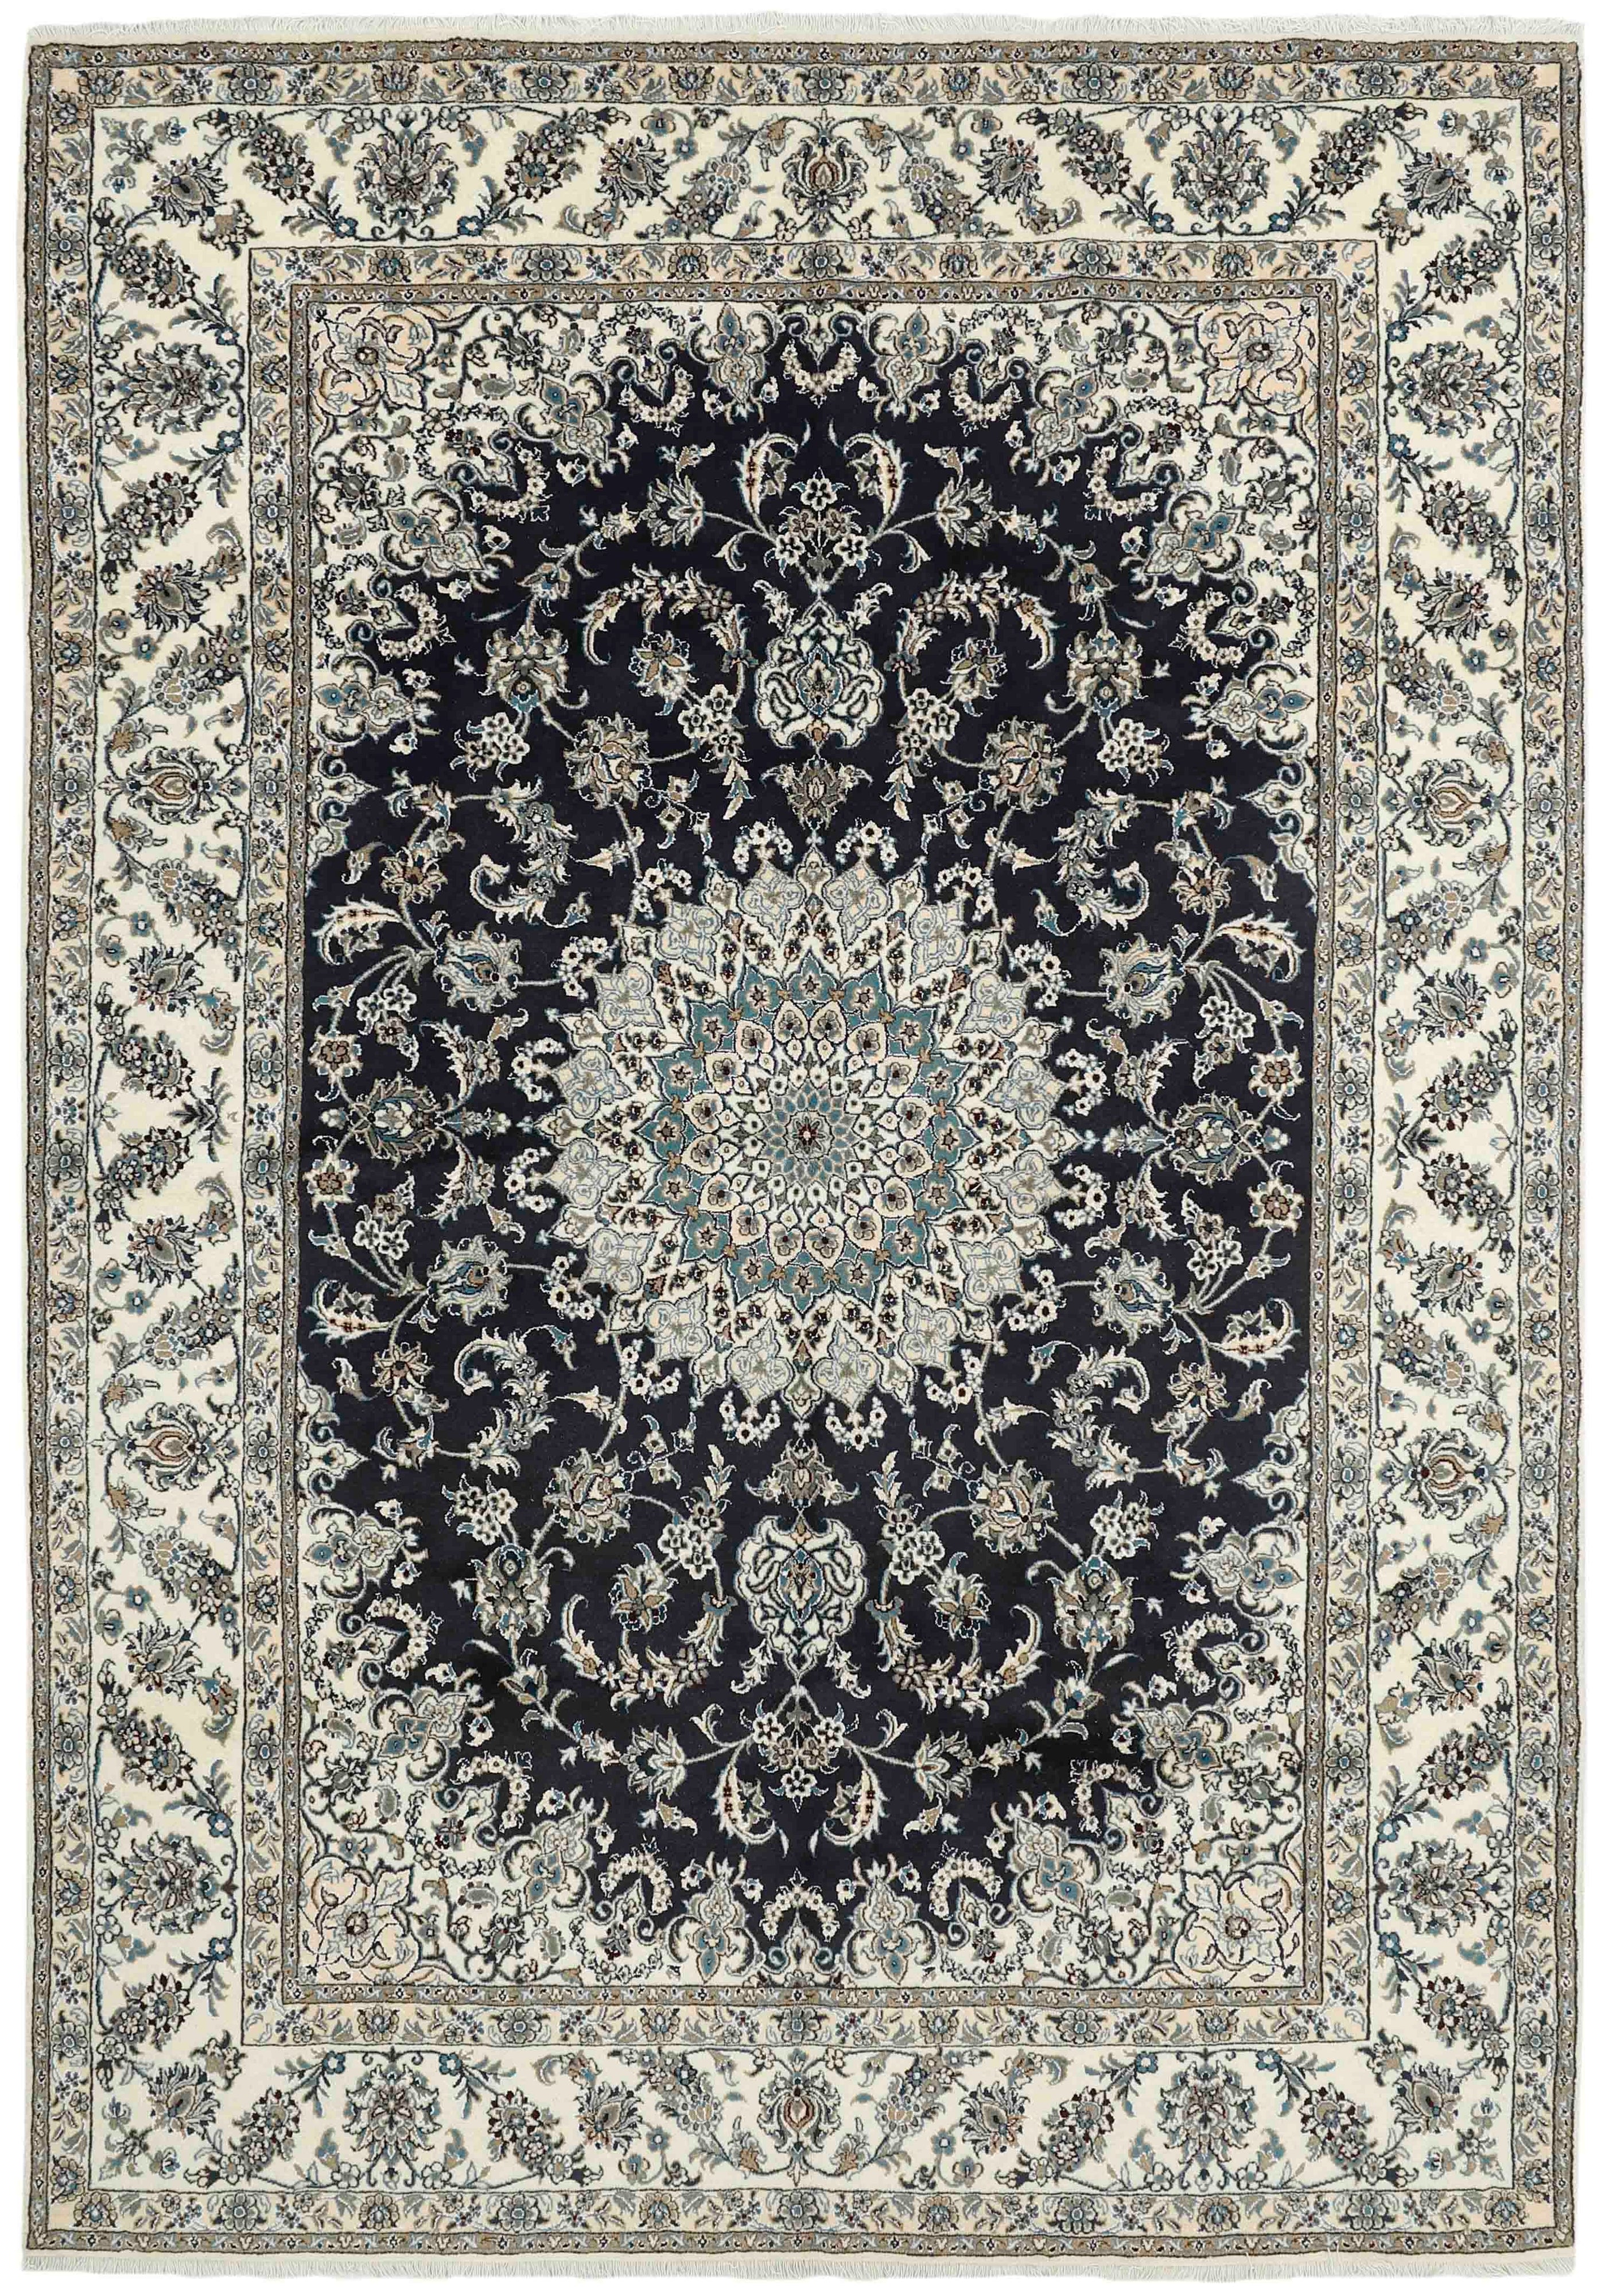 Authentic persian rug with a traditional floral design in cream, blue and black